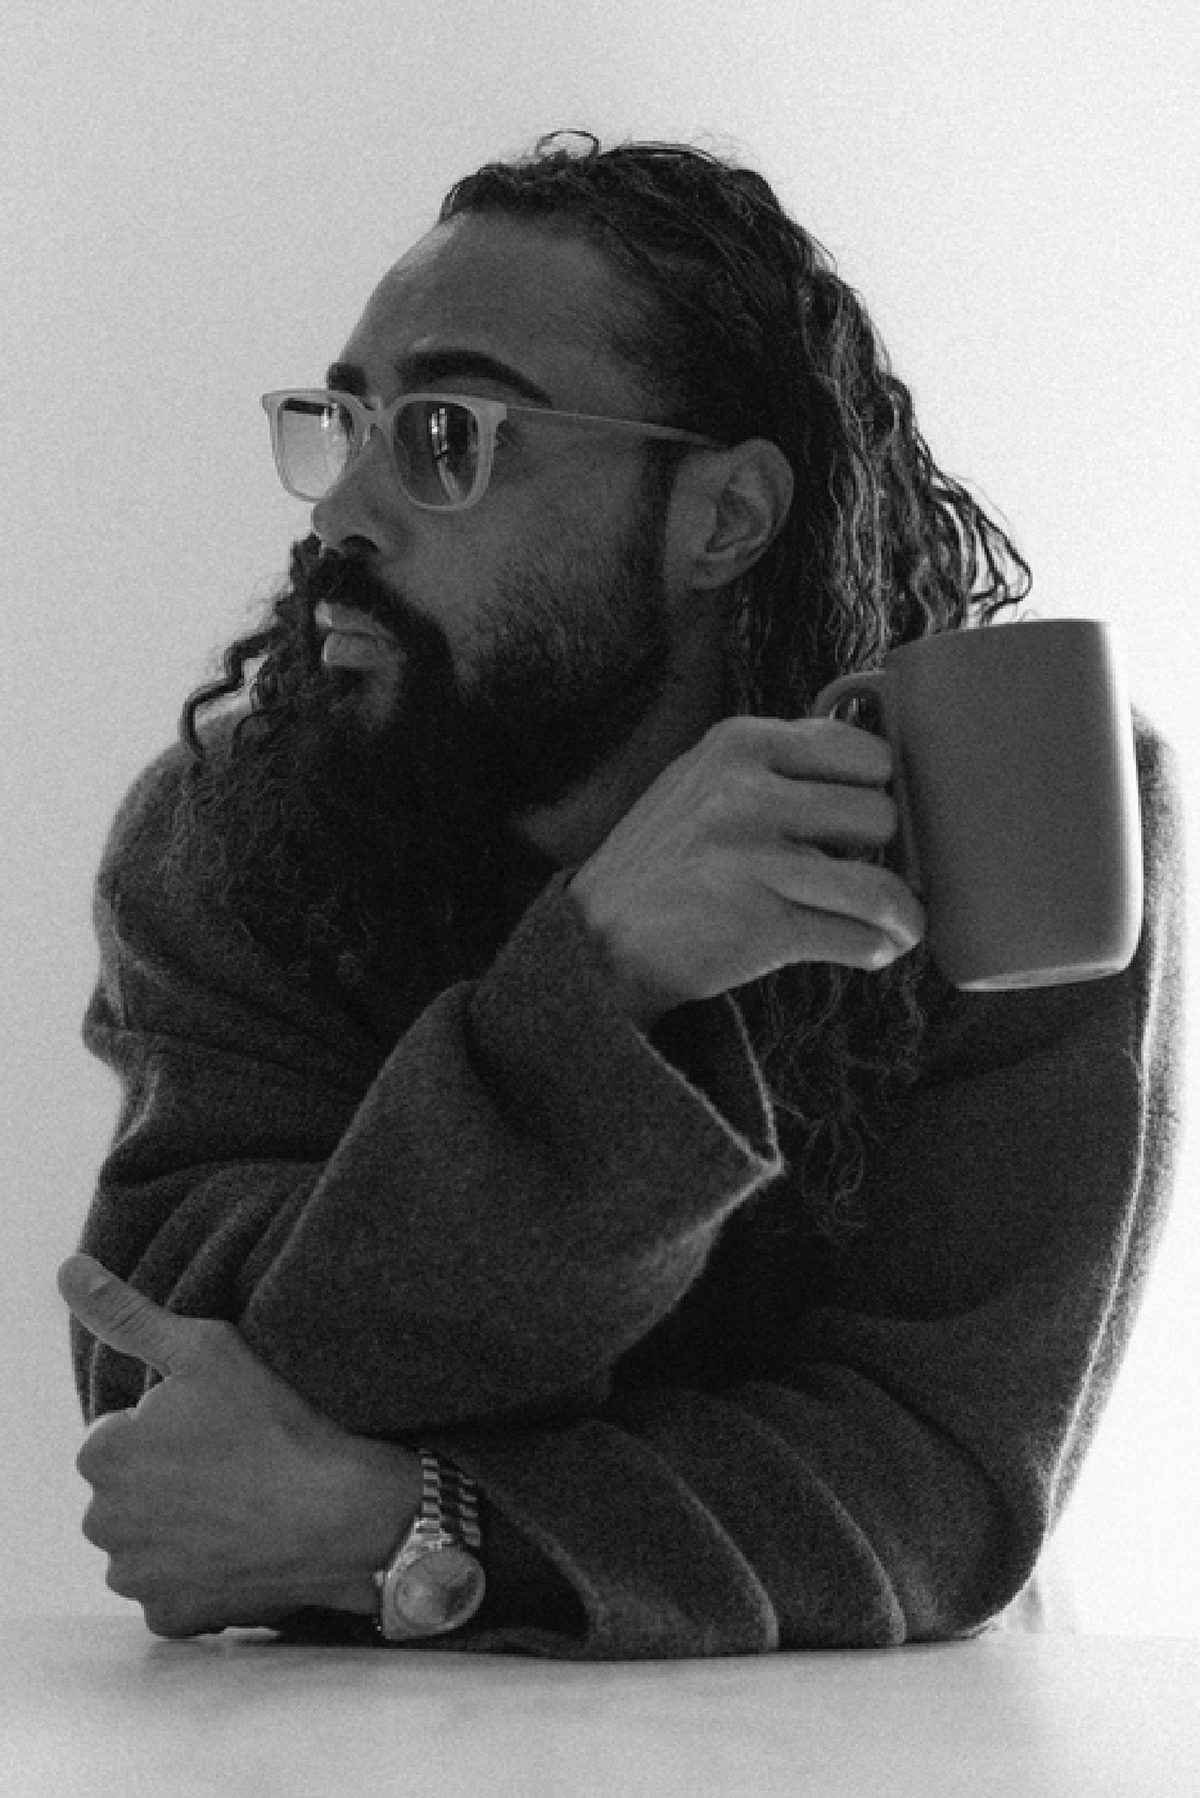 What Inspires Jerry Lorenzo's Fear of God Label